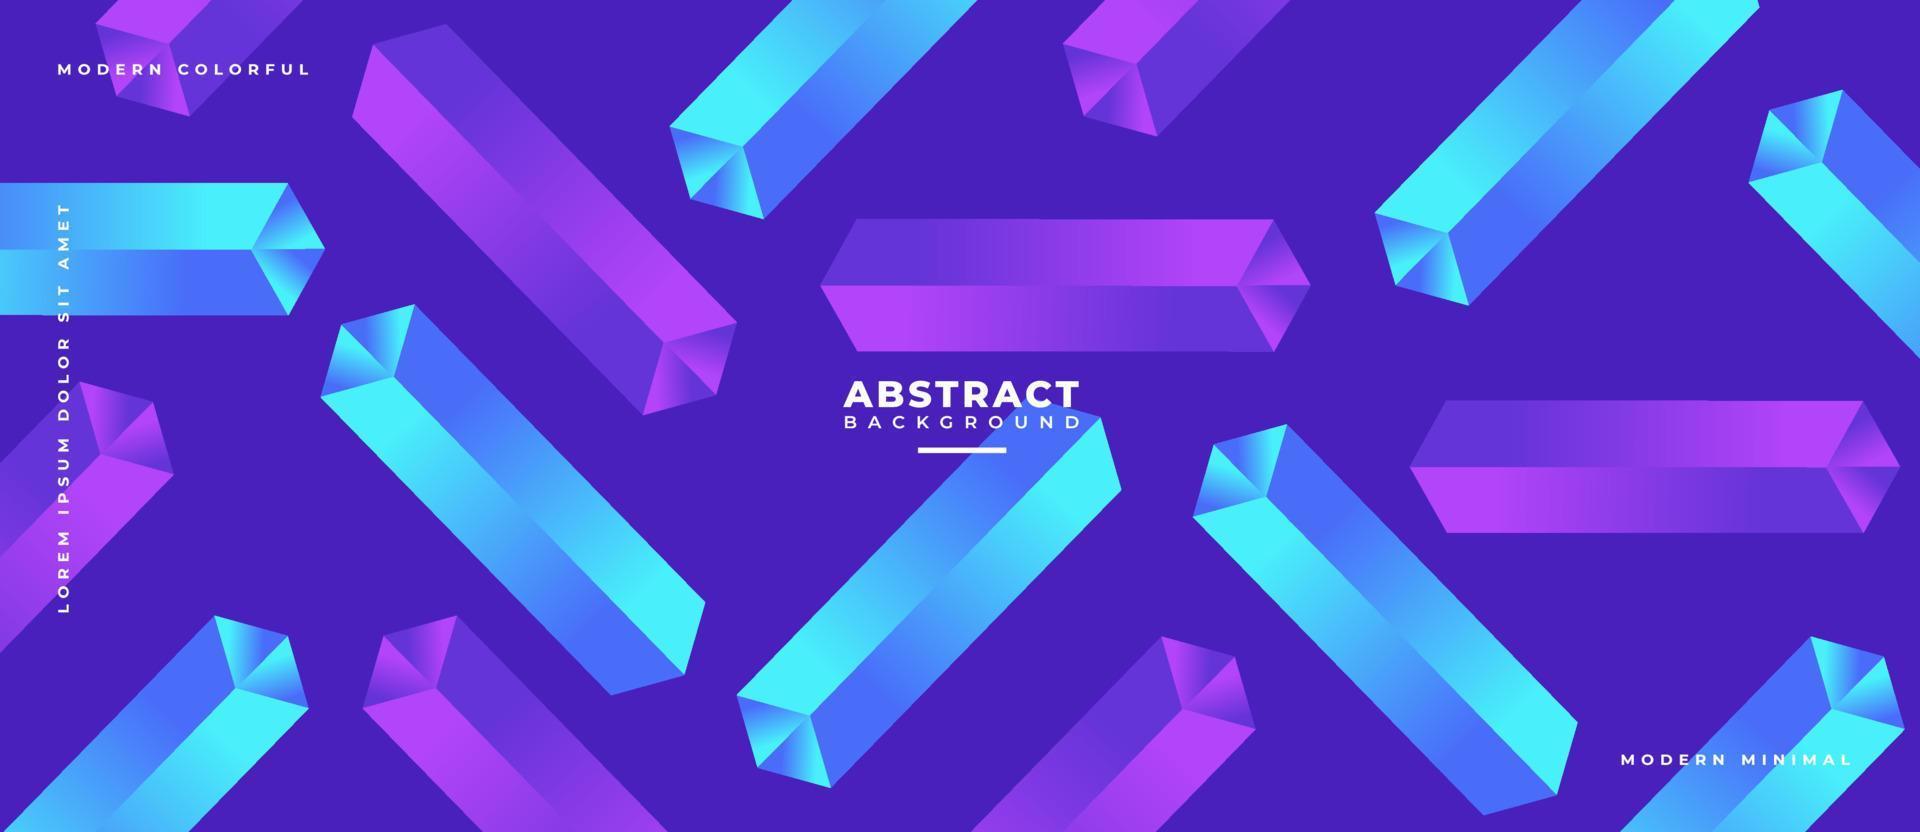 Colorful animated gradient blue, purple rectangle. 3D geometric shape futuristic abstract background. vector